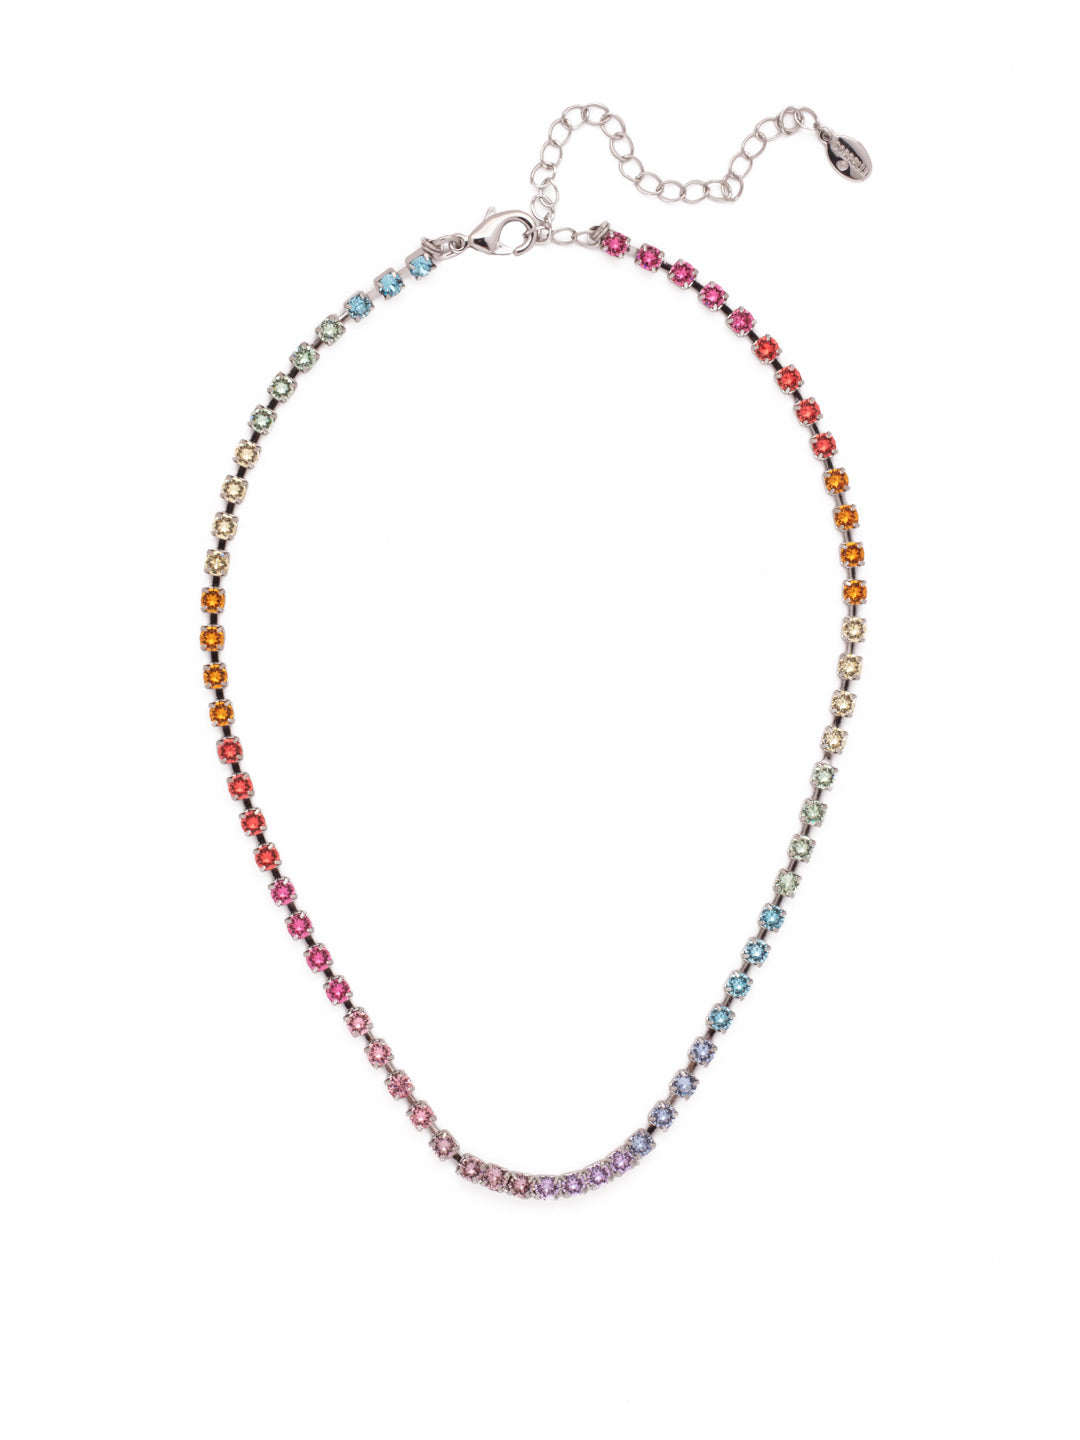 Marnie Tennis Necklace - NFA2PDPRI - <p>Perfect for dressing up or down, the classic Marnie Tennis Necklace features a repeating line of crystals secured by a lobster claw clasp. From Sorrelli's Prism collection in our Palladium finish.</p>